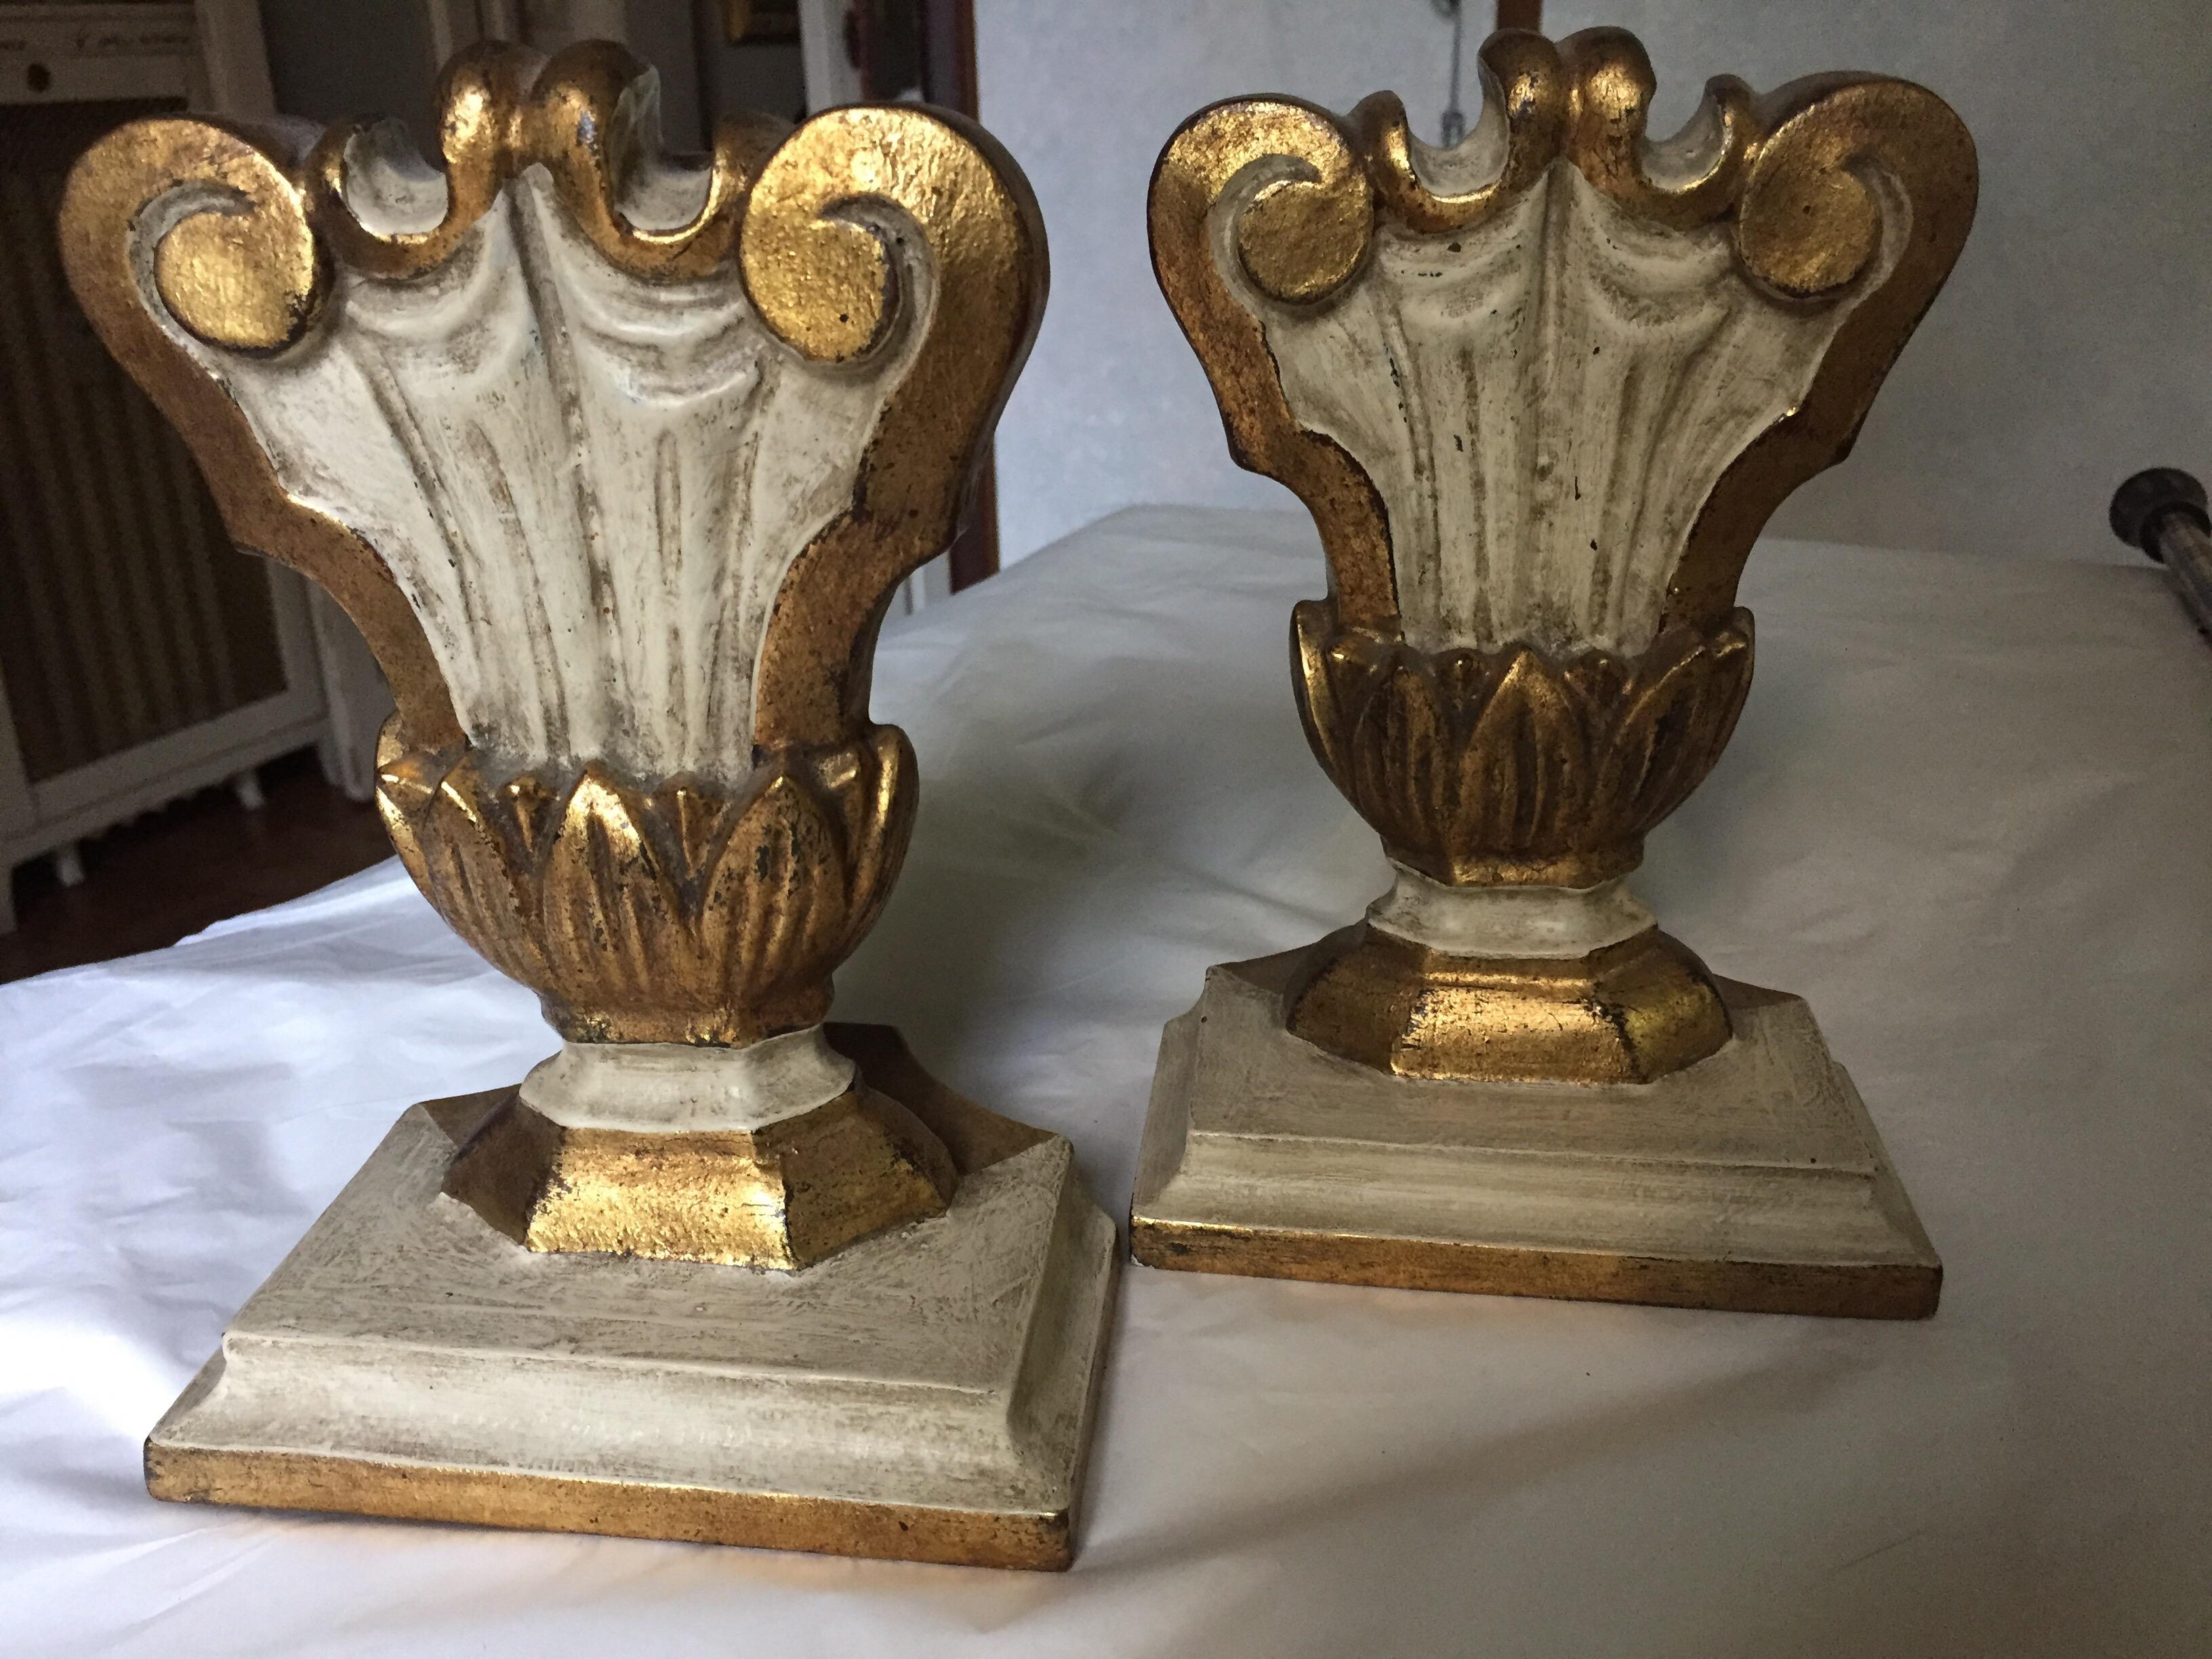 From Verona Italy, a pair of late 20th century hand carved mecca finish and ivory painted bases, suitable to make beautiful bedside table lamps, see the holes suitable for wiring in the back.
These Italian bases are crafted just in the front side,